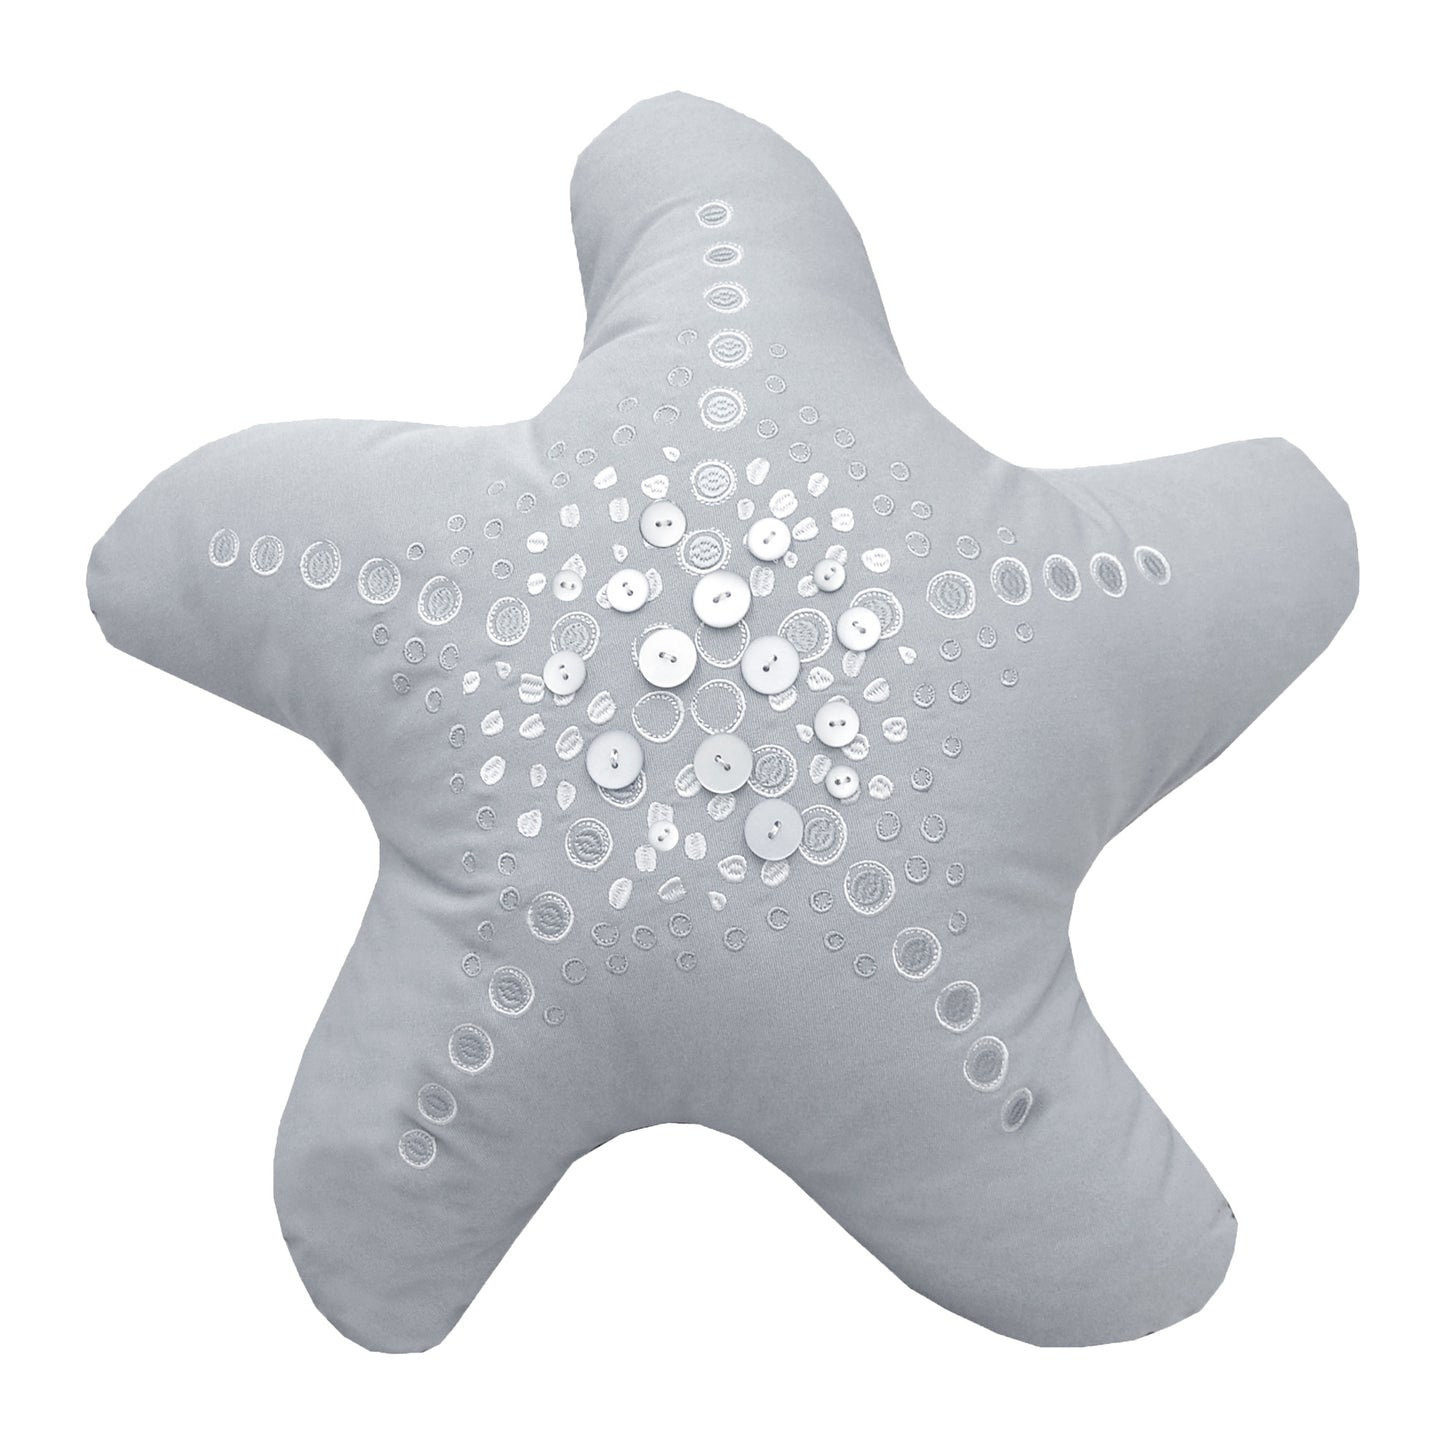 Silver sea star shaped indoor outdoor pillow with embroidered and beaded accents.